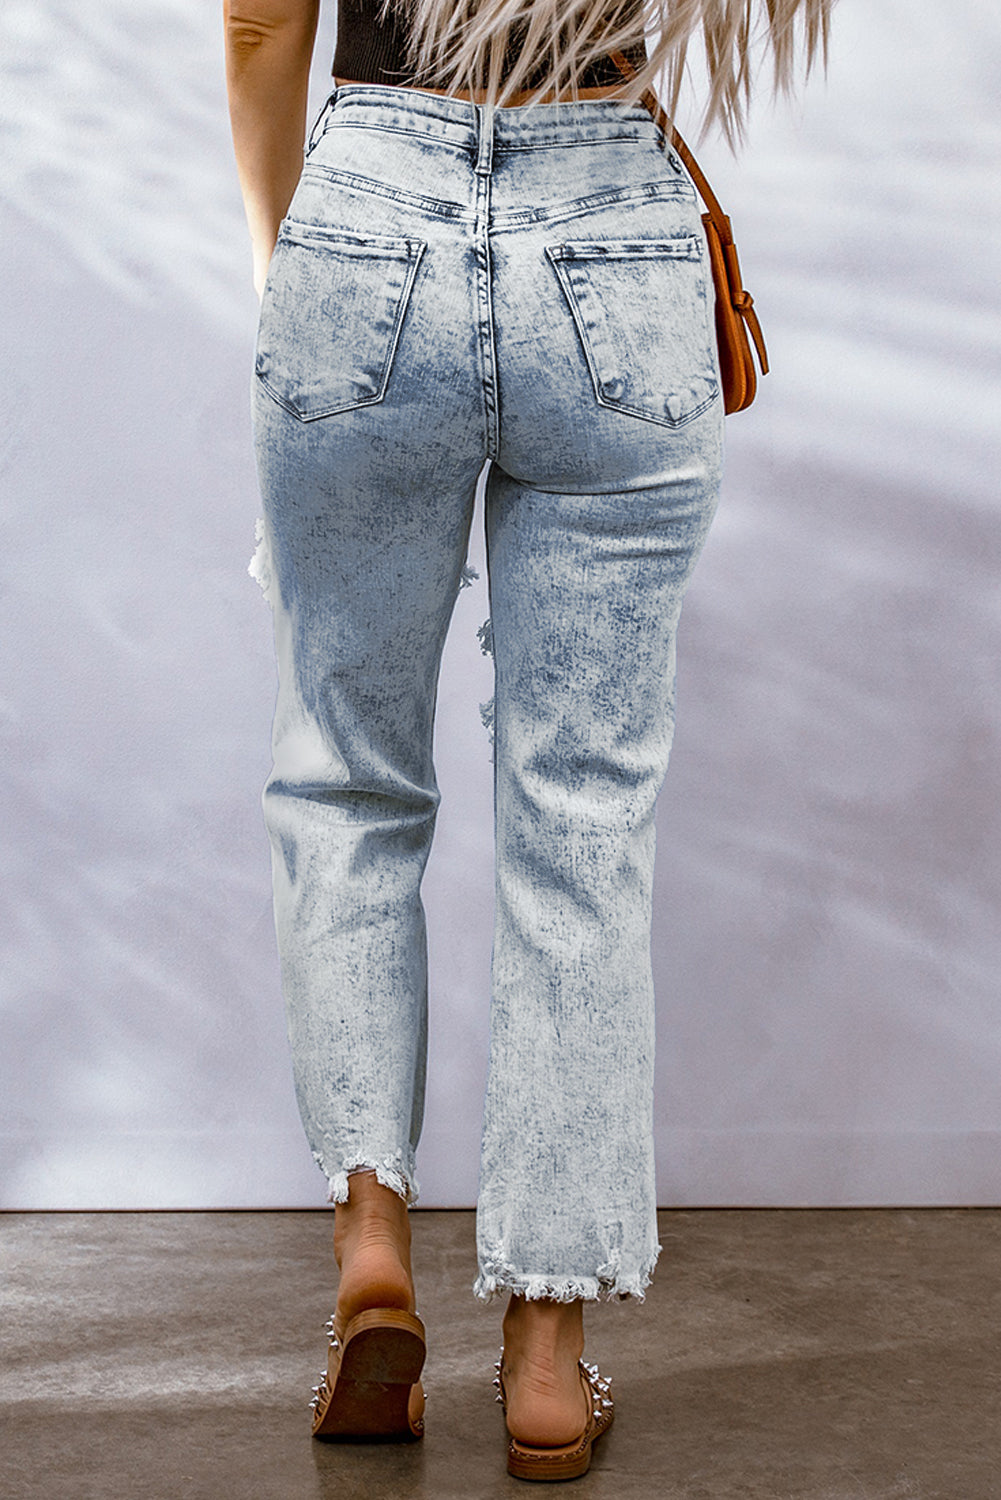 Sky Blue Hollow-out Light Washed Ripped Boyfriend Jeans Jeans JT's Designer Fashion